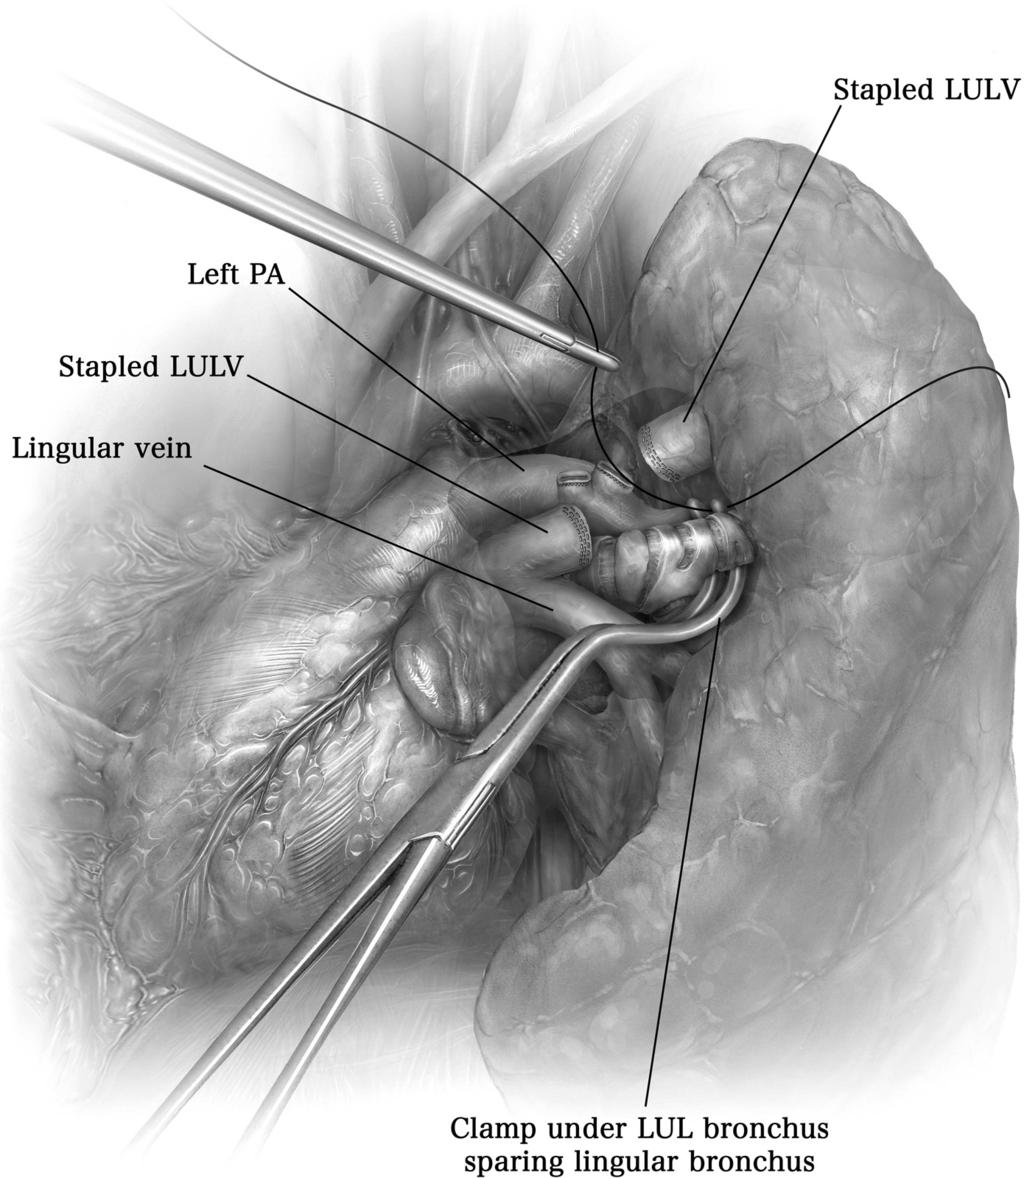 Minimally invasive segmentectomy 115 Figure 7 After the superior pulmonary vein is stapled, dissection of the main pulmonary artery usually reveals 2 to 3 anterior apical branches of the left upper